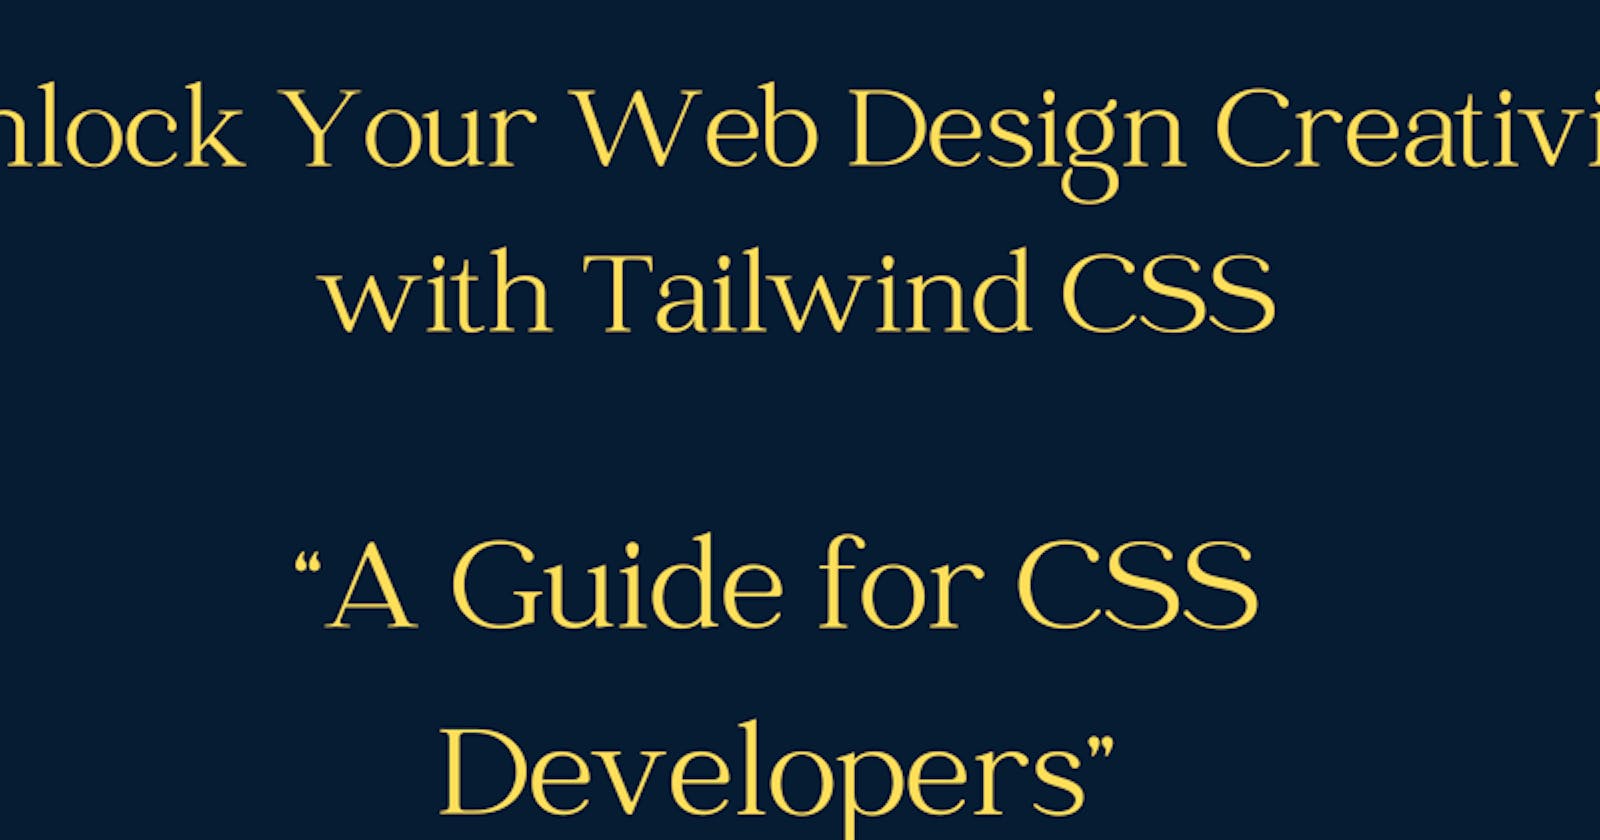 Unlock Your Web Design Creativity with Tailwind CSS: A Guide for CSS Developers